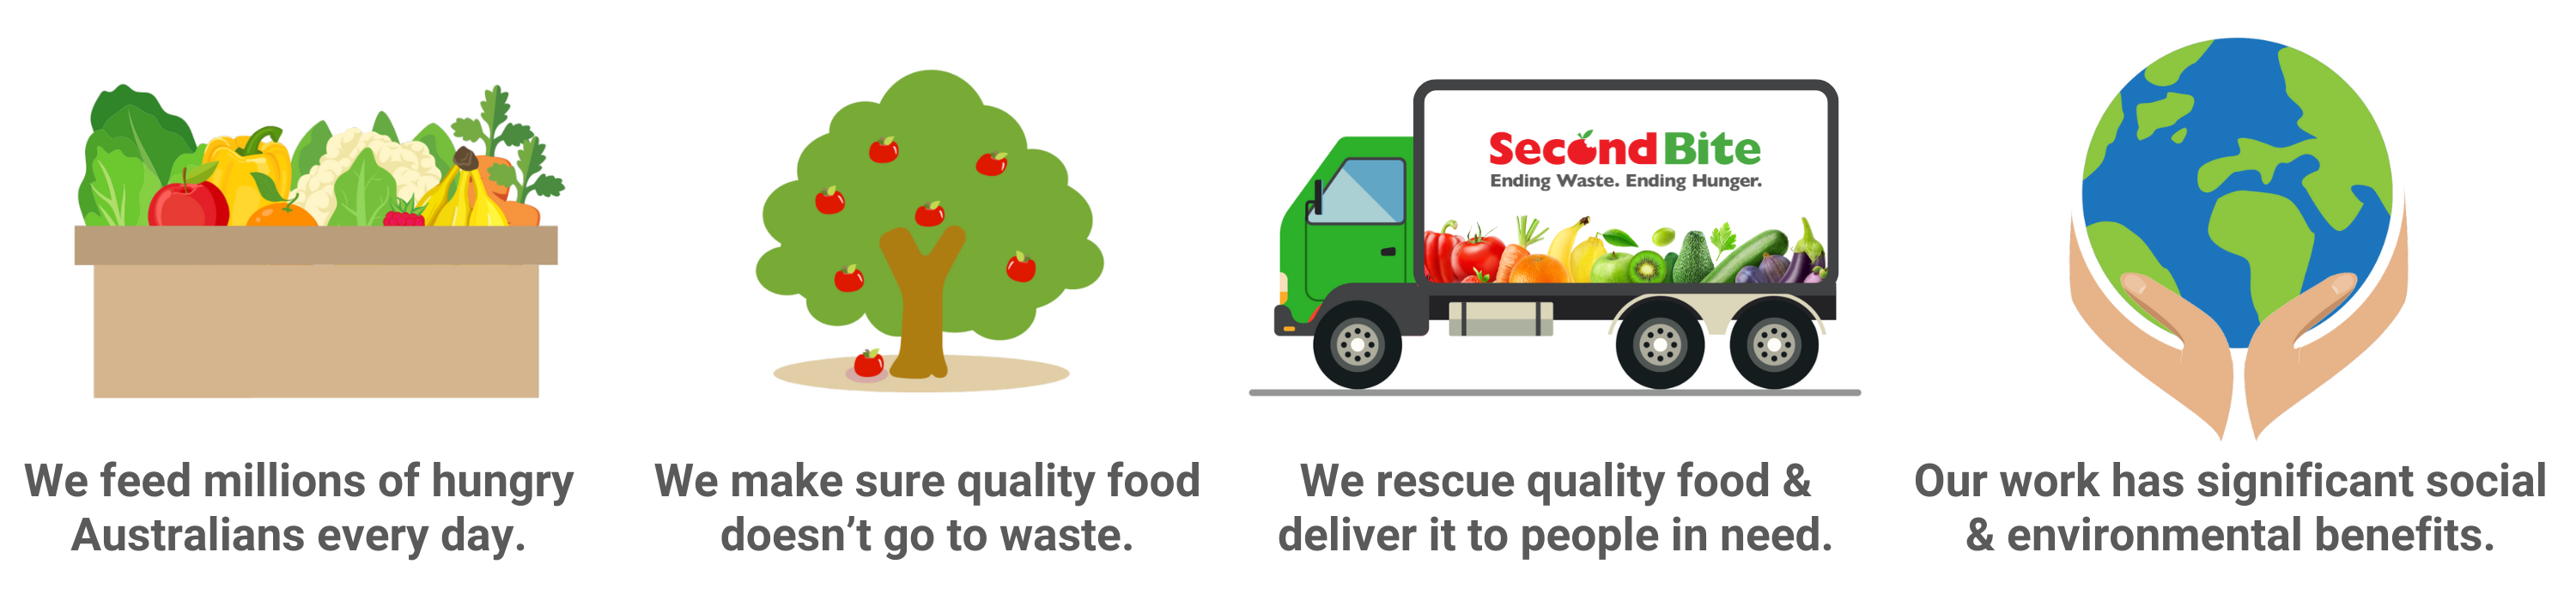 SecondBite Food Rescue Charity What We Do